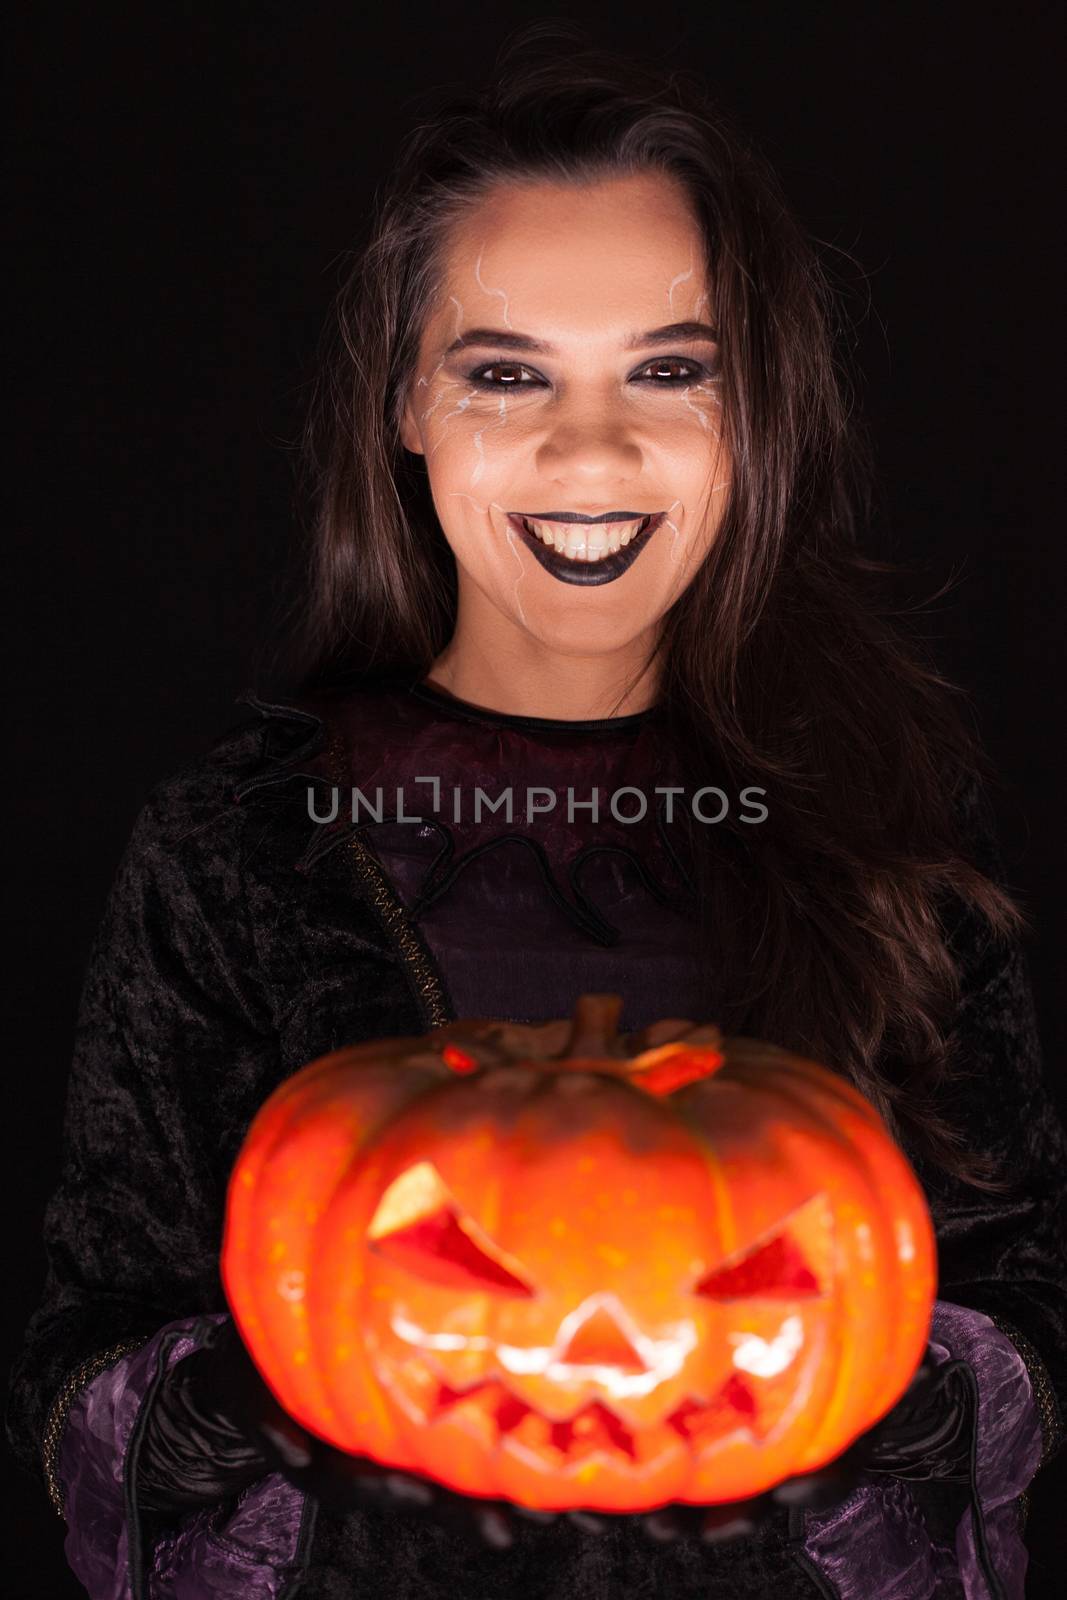 Beautiful woman wearing witch outfit for halloween holding a spooky pumpkin over black background.